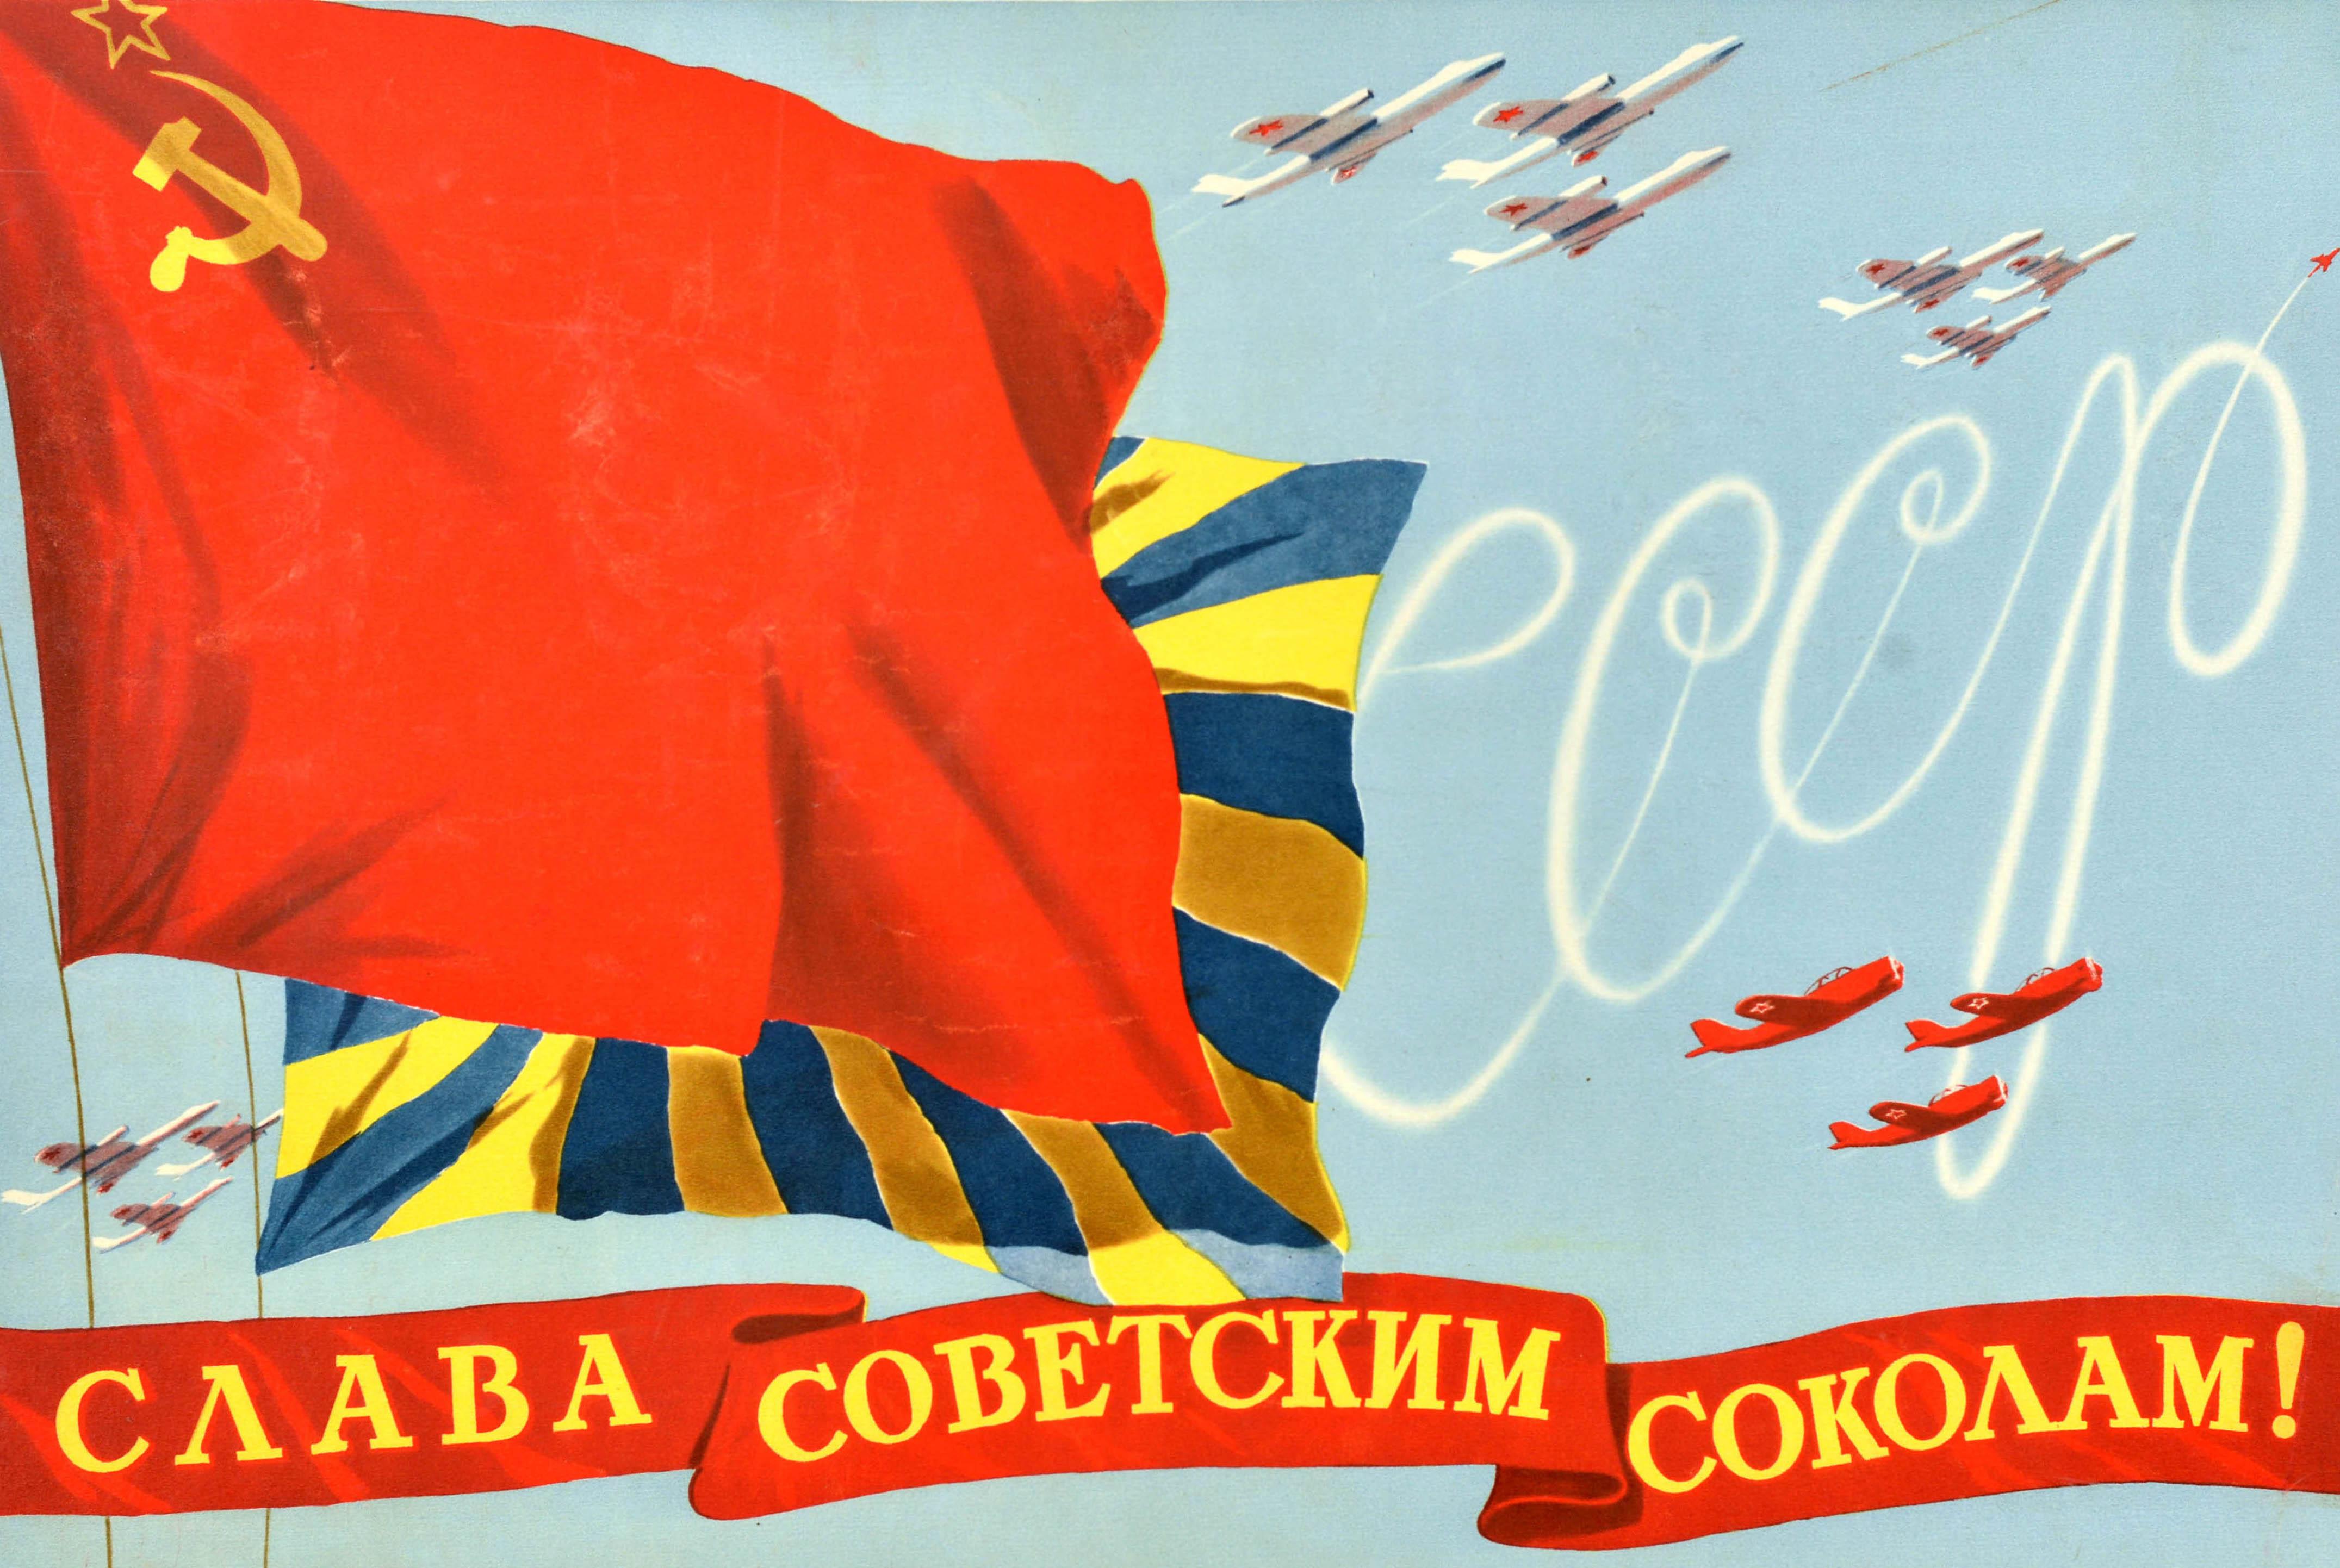 Original vintage Soviet aviation propaganda poster - Слава Советским Соколам! / Glory to the Soviet Falcons - featuring a dynamic military illustration of the red hammer and sickle flag and the flag of the Soviet Air Force with various fighter